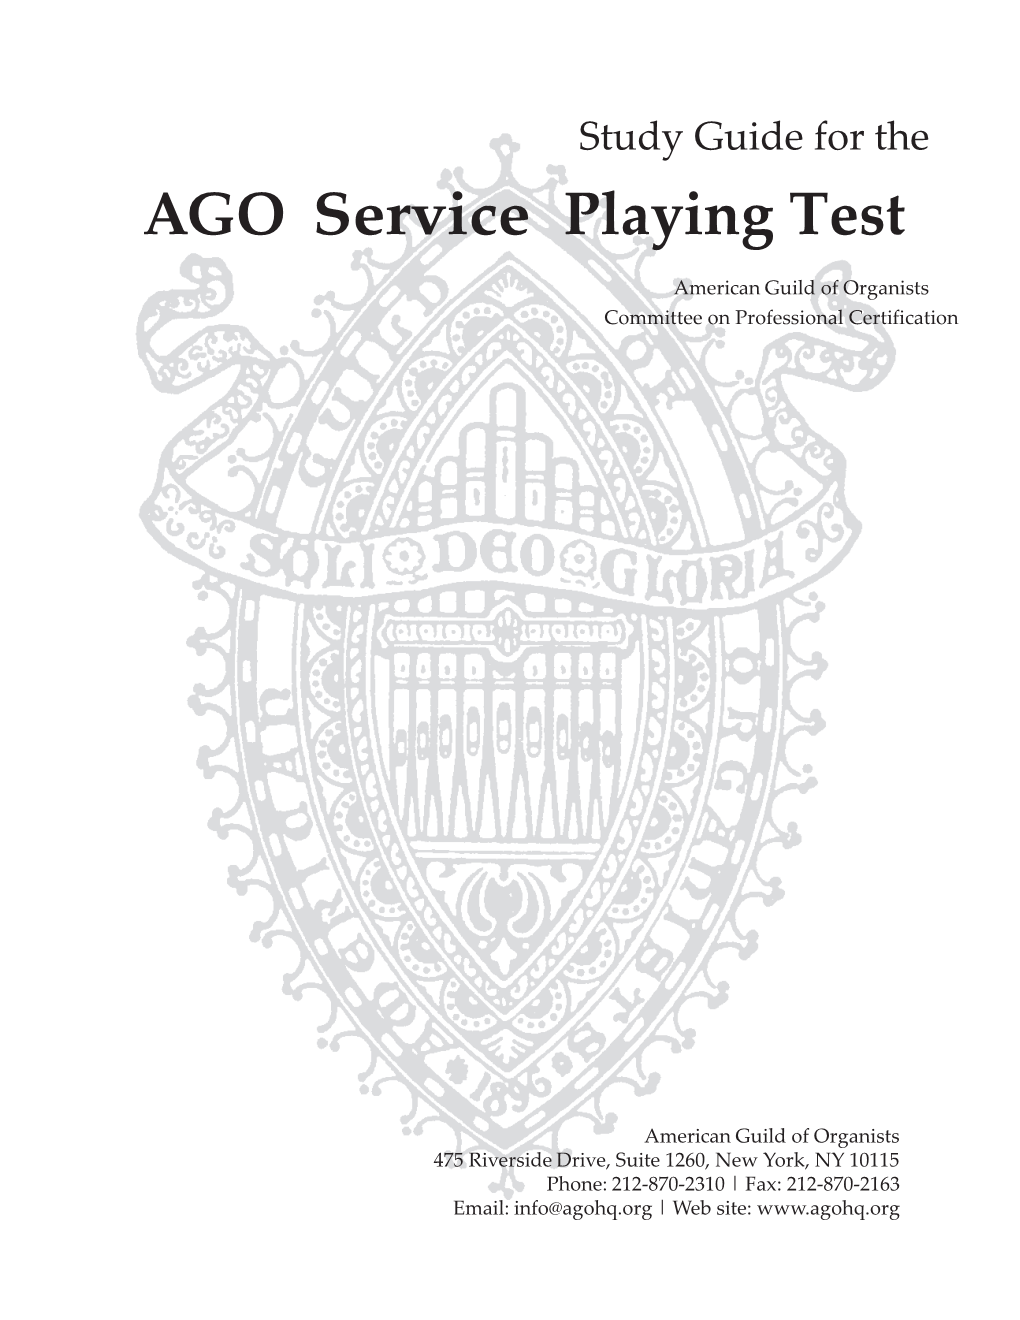 Service Playing Test Study Guide Was Created to Incor- Porate Changes and Repertoire Additions to the Test Since 1998